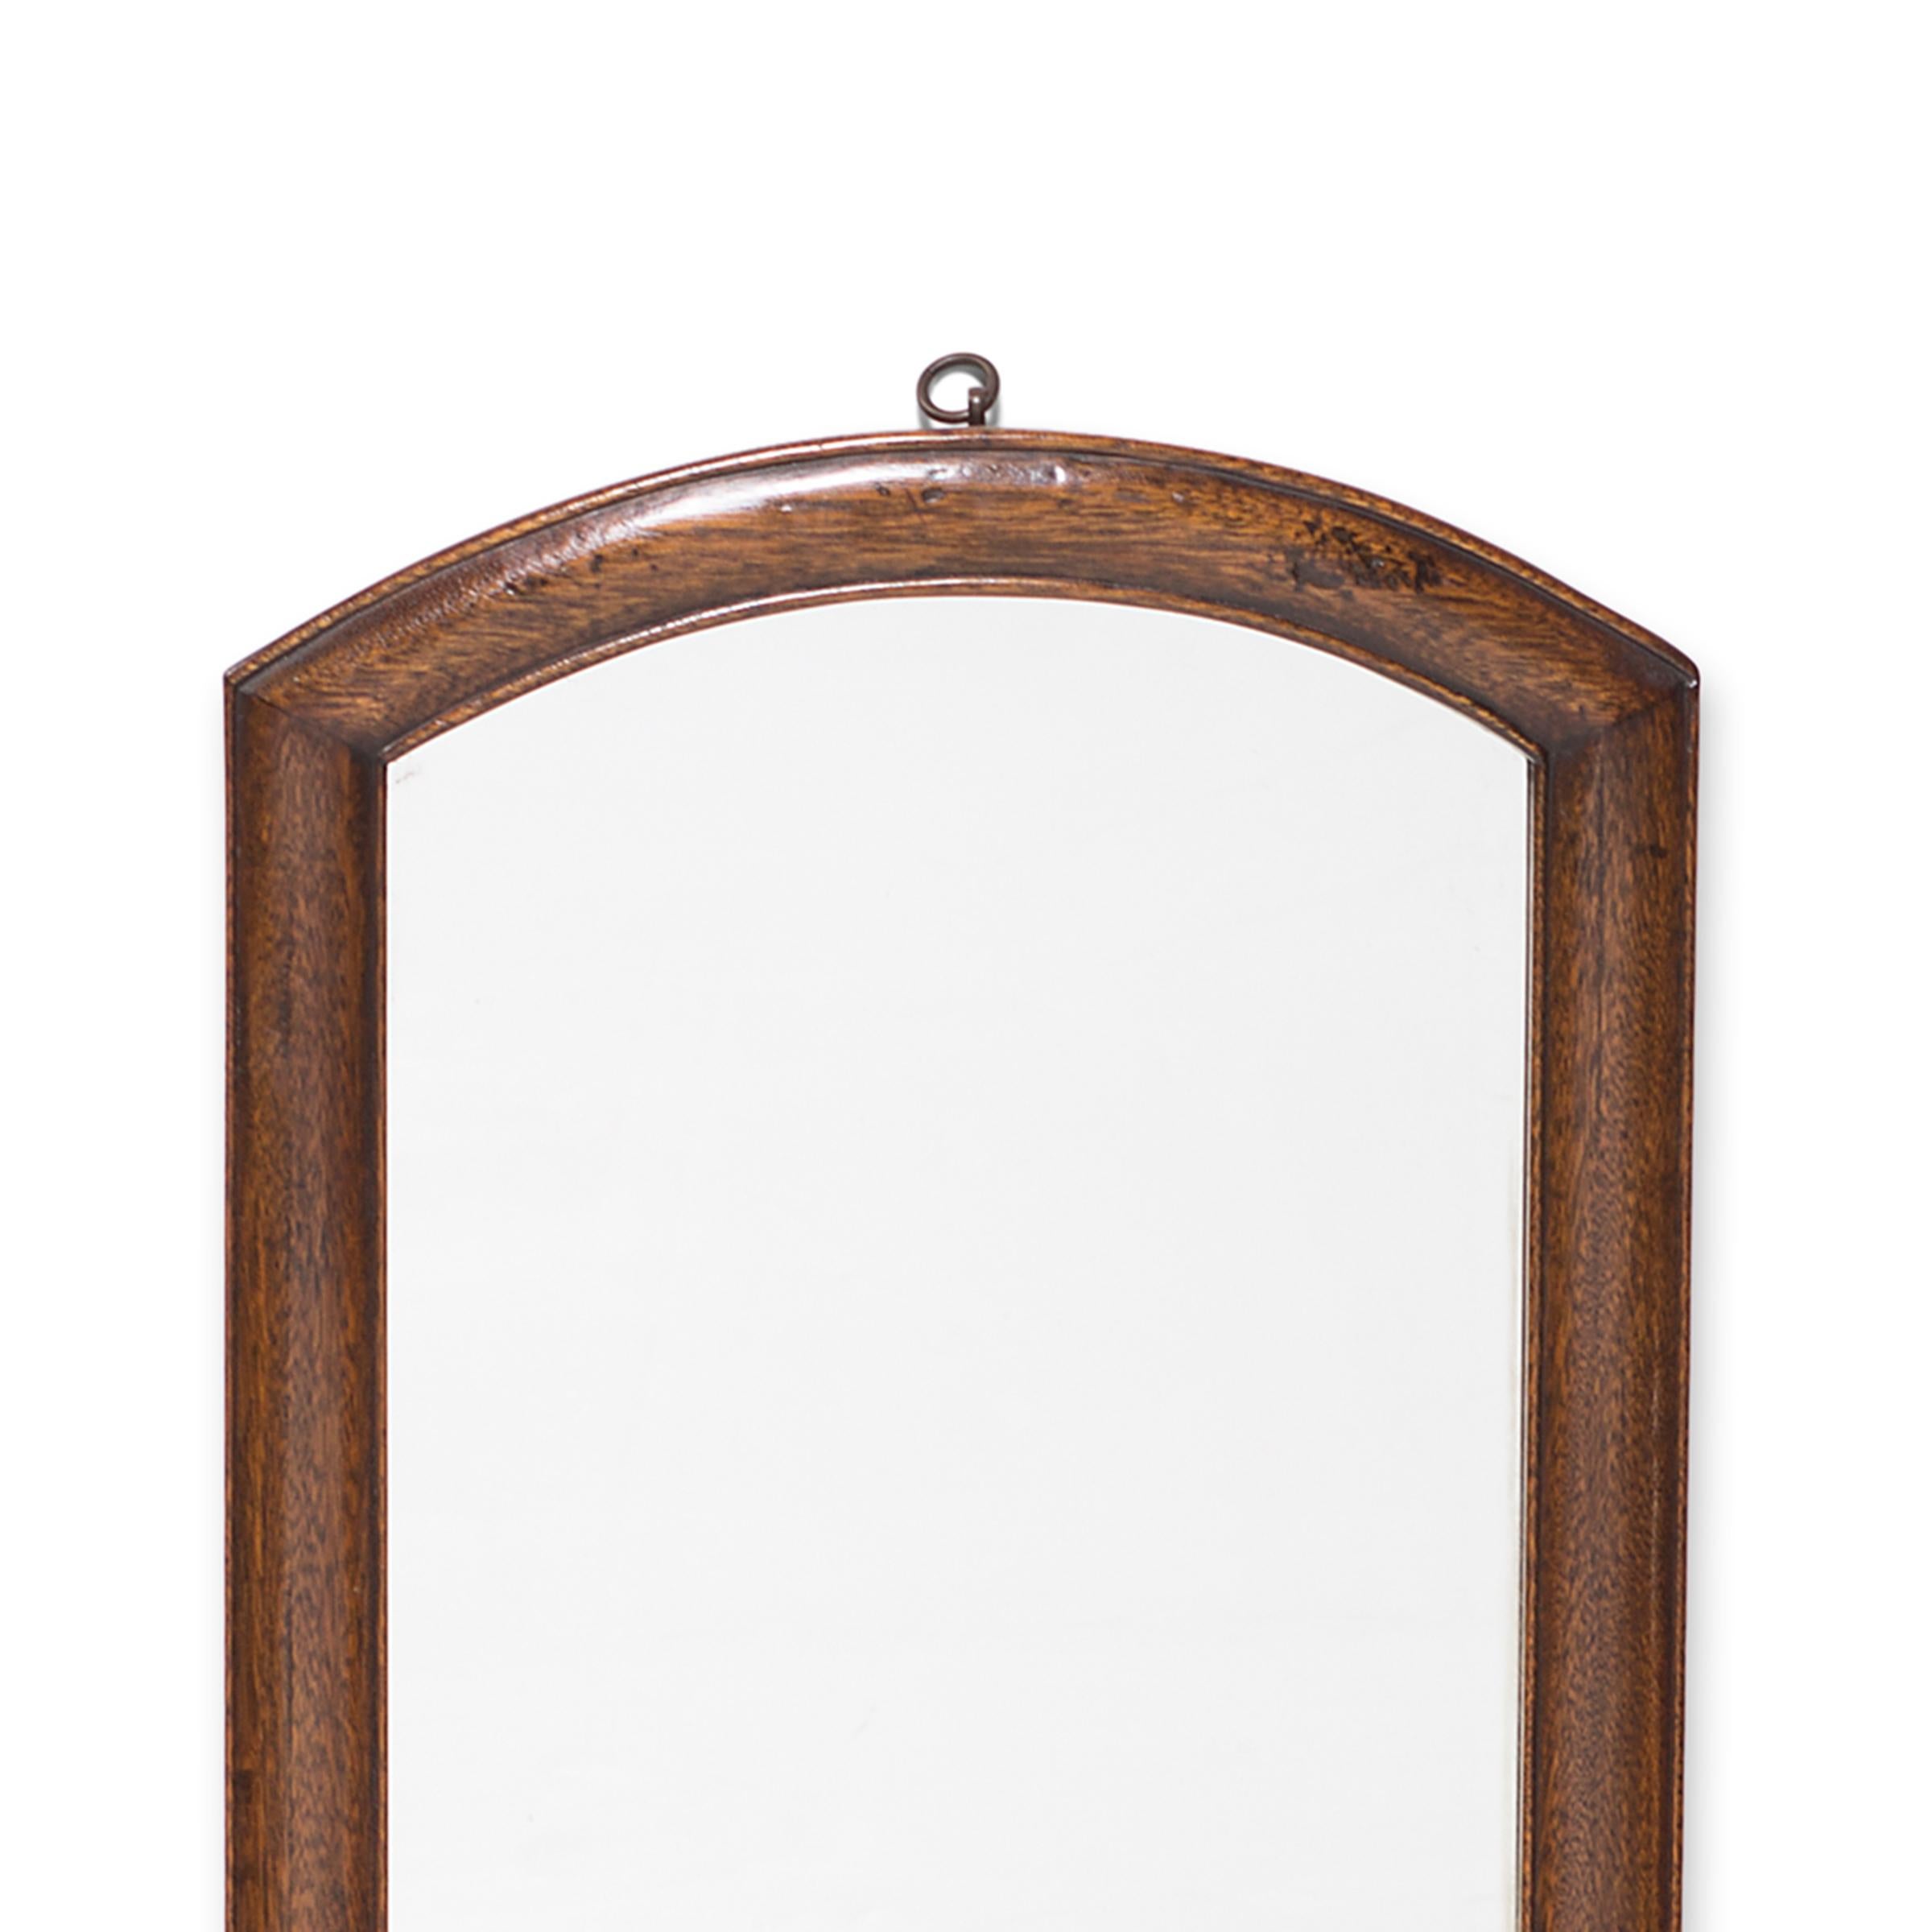 This Art Deco wall mirror from Shanghai, China is framed in a fine hardwood valued for its tight grain and warm coloring. The influence of Western aesthetics in the early 20th century is apparent in the modern geometry of its deceptively simple